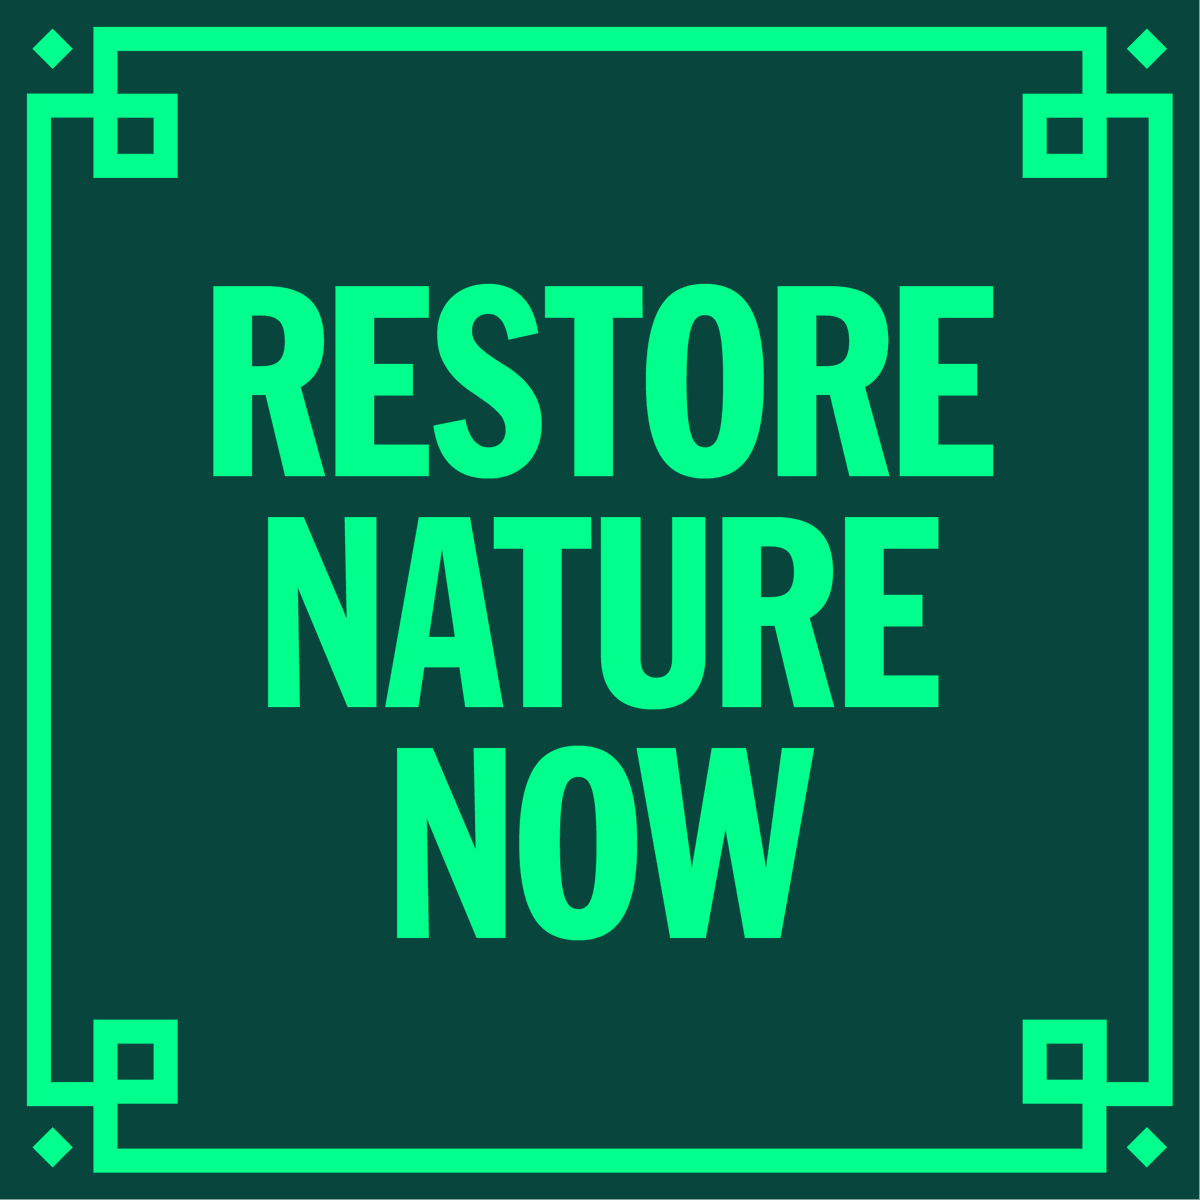 UK nature is struggling & it needs us to stand up for it! 🥀 🗓️ On 22 June we're uniting for nature in London, to send a clear message to all politicians to #RestoreNatureNow. Everyone's welcome to join — read more & sign up! 👇 restorenaturenow.com @SWTsteve @g_stokes18